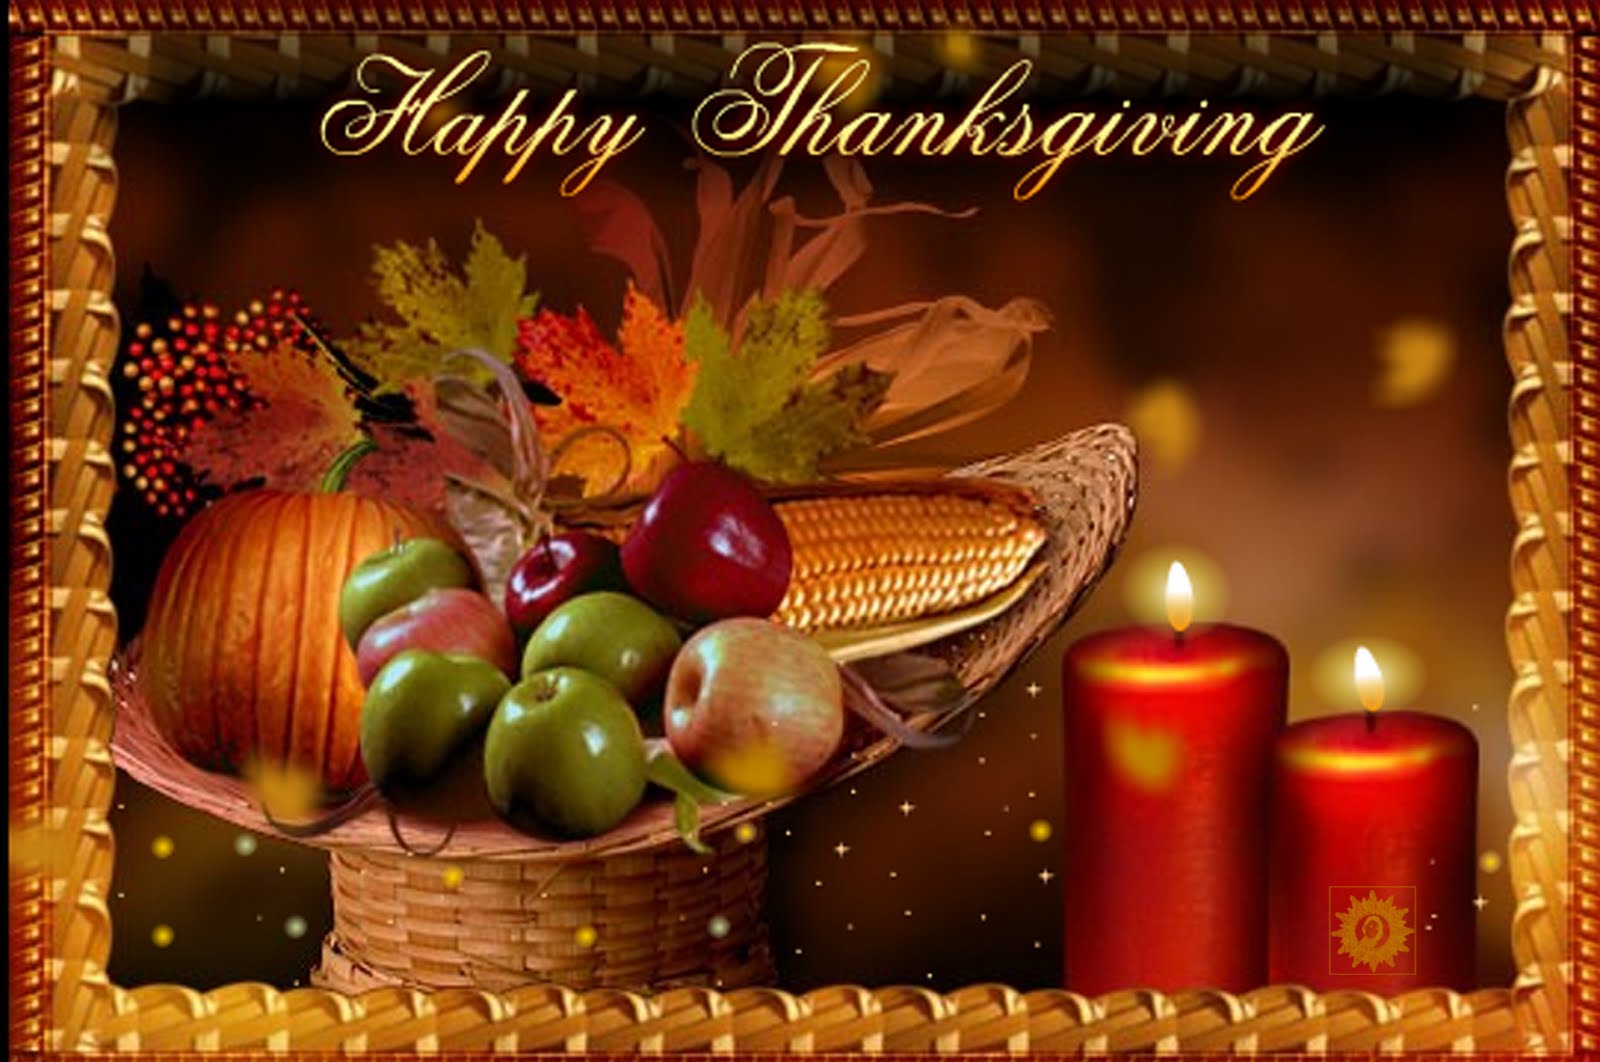 We Wish You A Very Happy Thanksgiving On Behalf Of